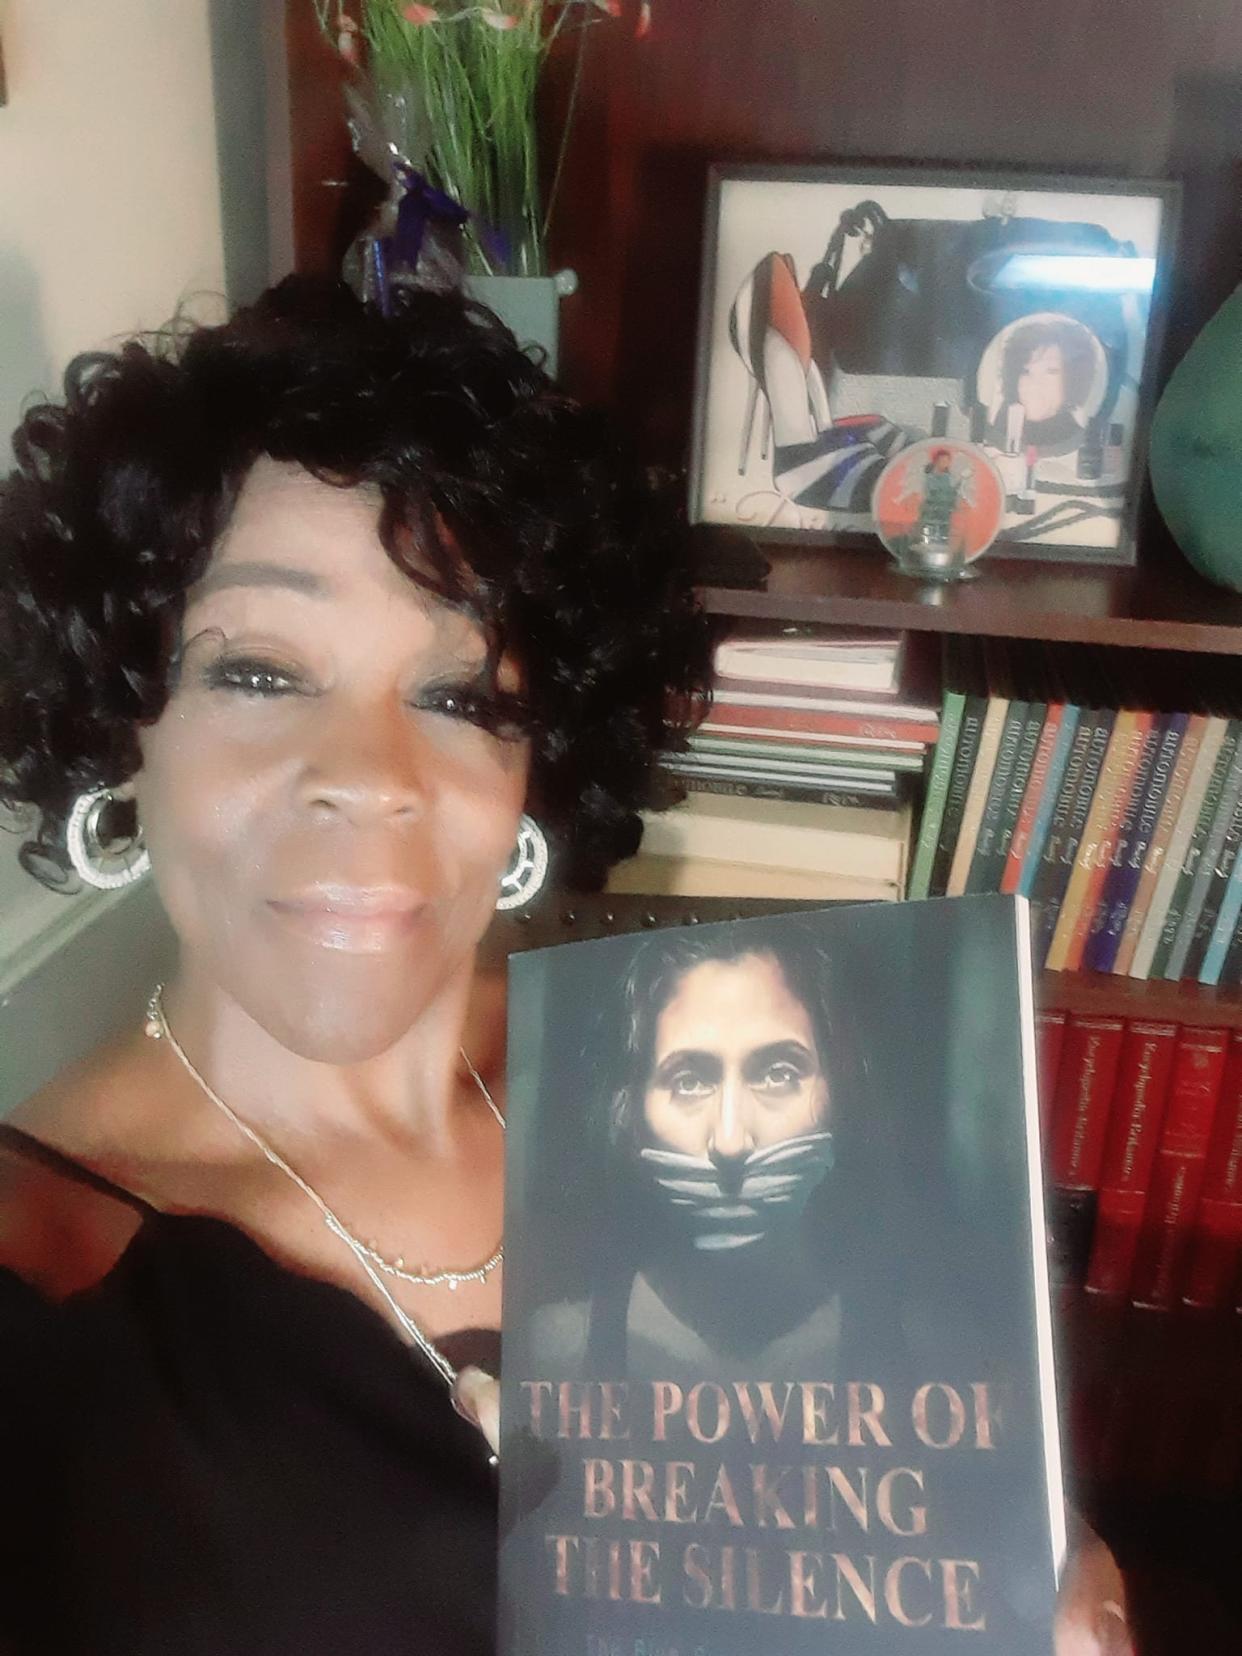 Battle Creek author Doris Taylor poses with her new book, "The Power Of Breaking The Silence: The Blue Print of a Survivor." Taylor collaborated with six other domestic violence survivors on the project.